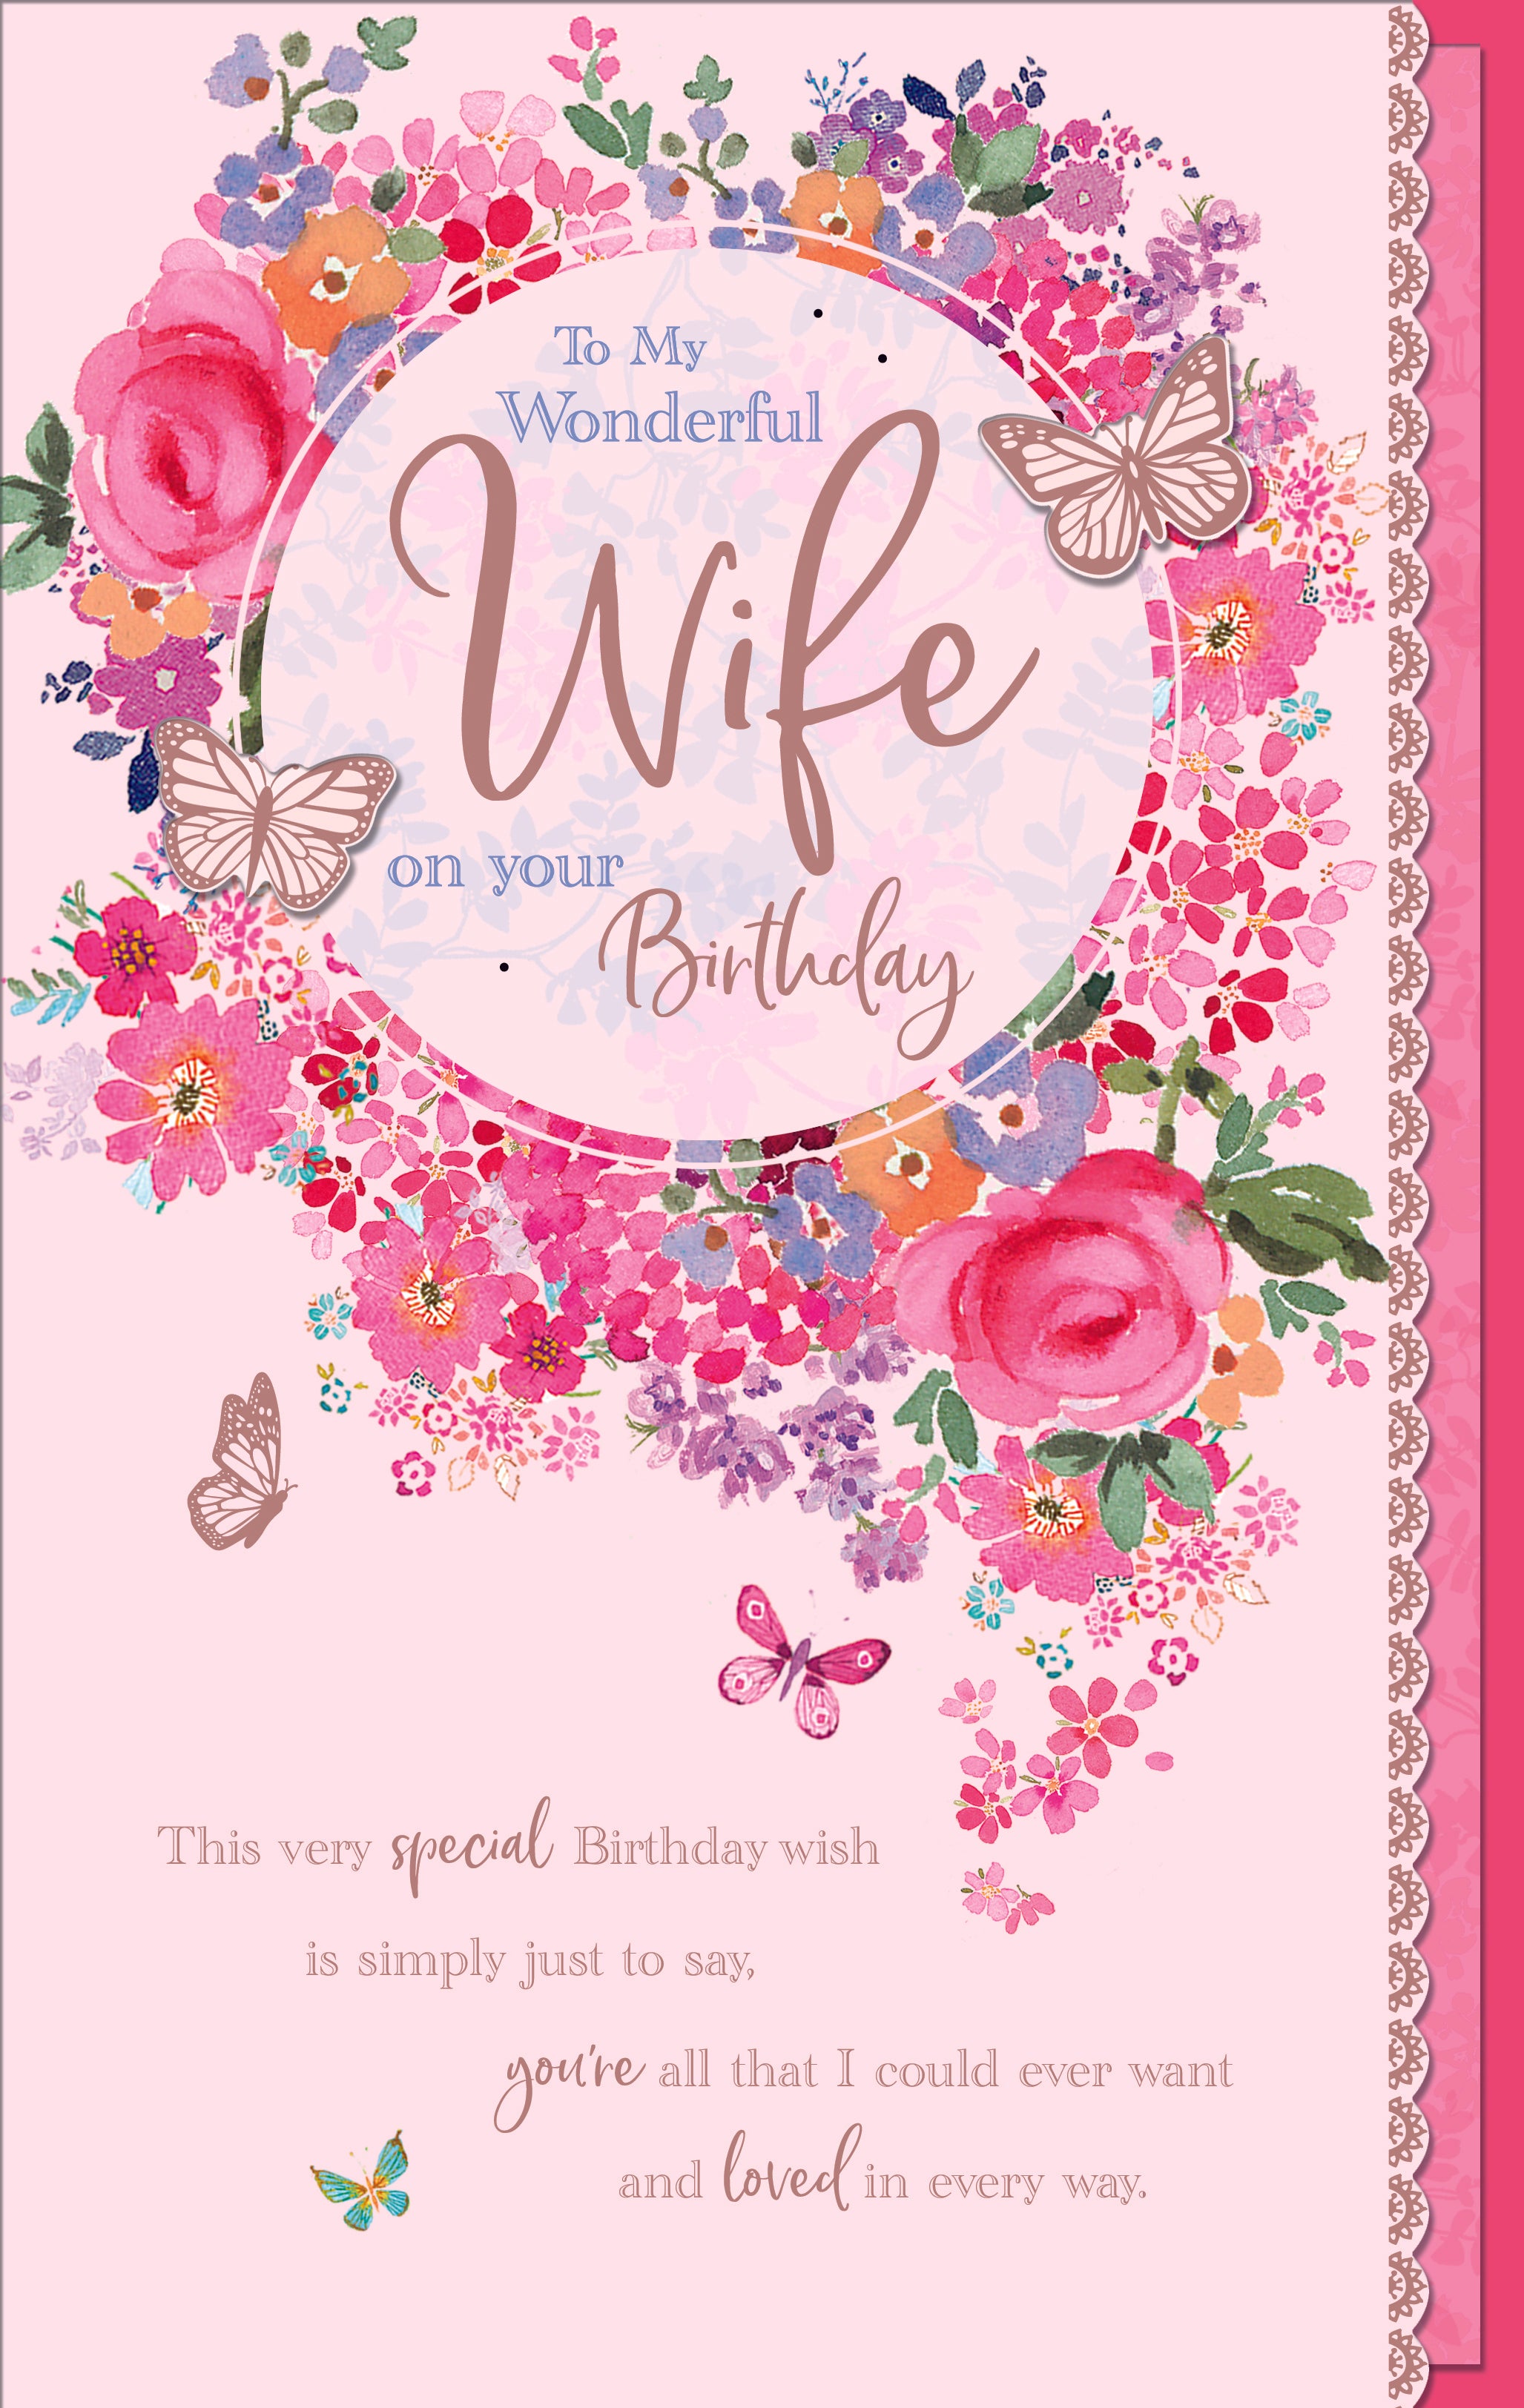 Wife Birthday Card - Flowers And Butterflies